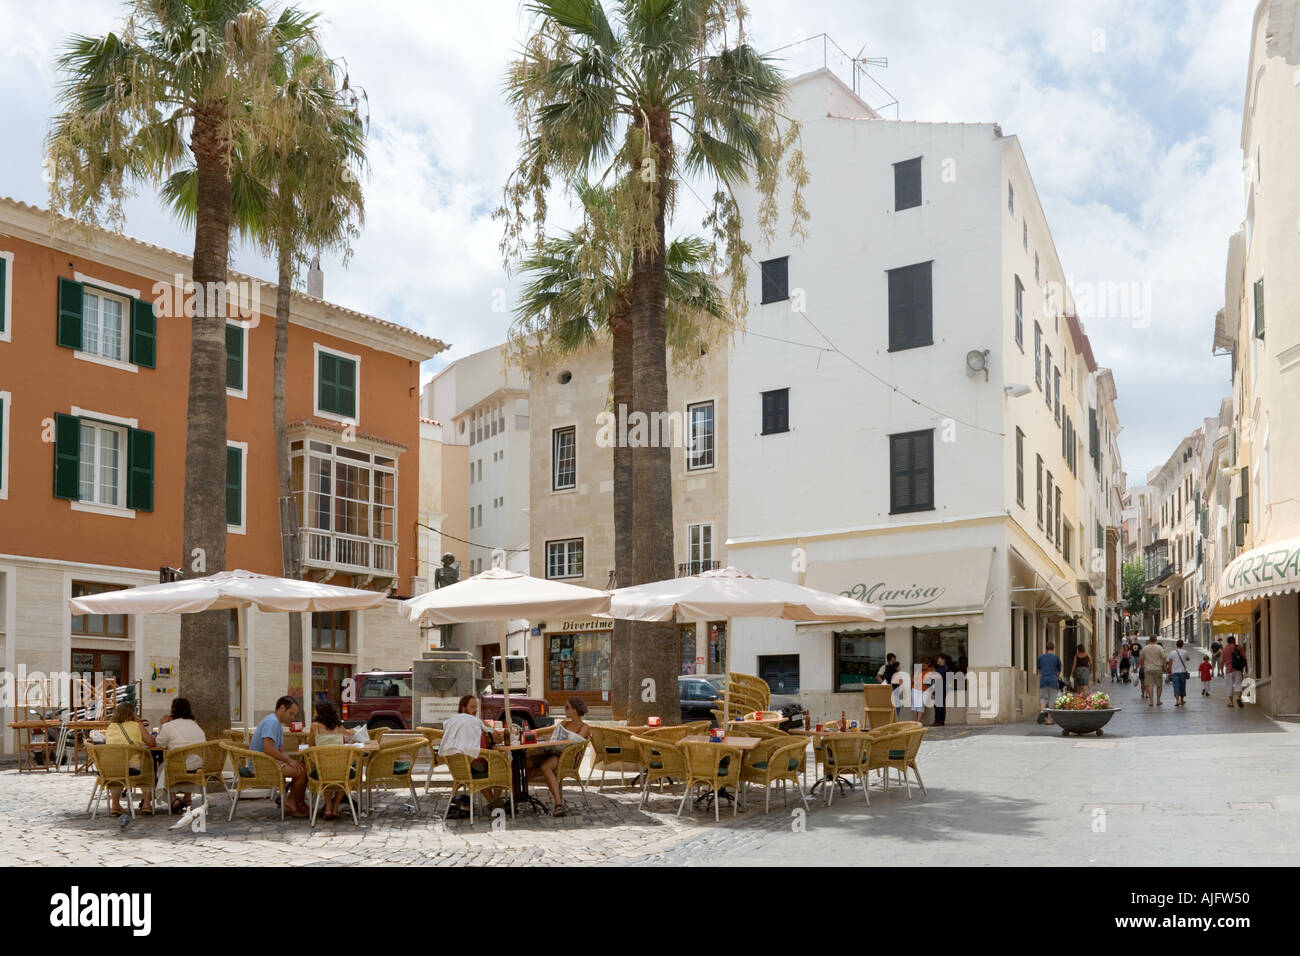 Sidewalk cafe in the old town, Mahon, Menorca, Balearic Islands, Spain Stock Photo